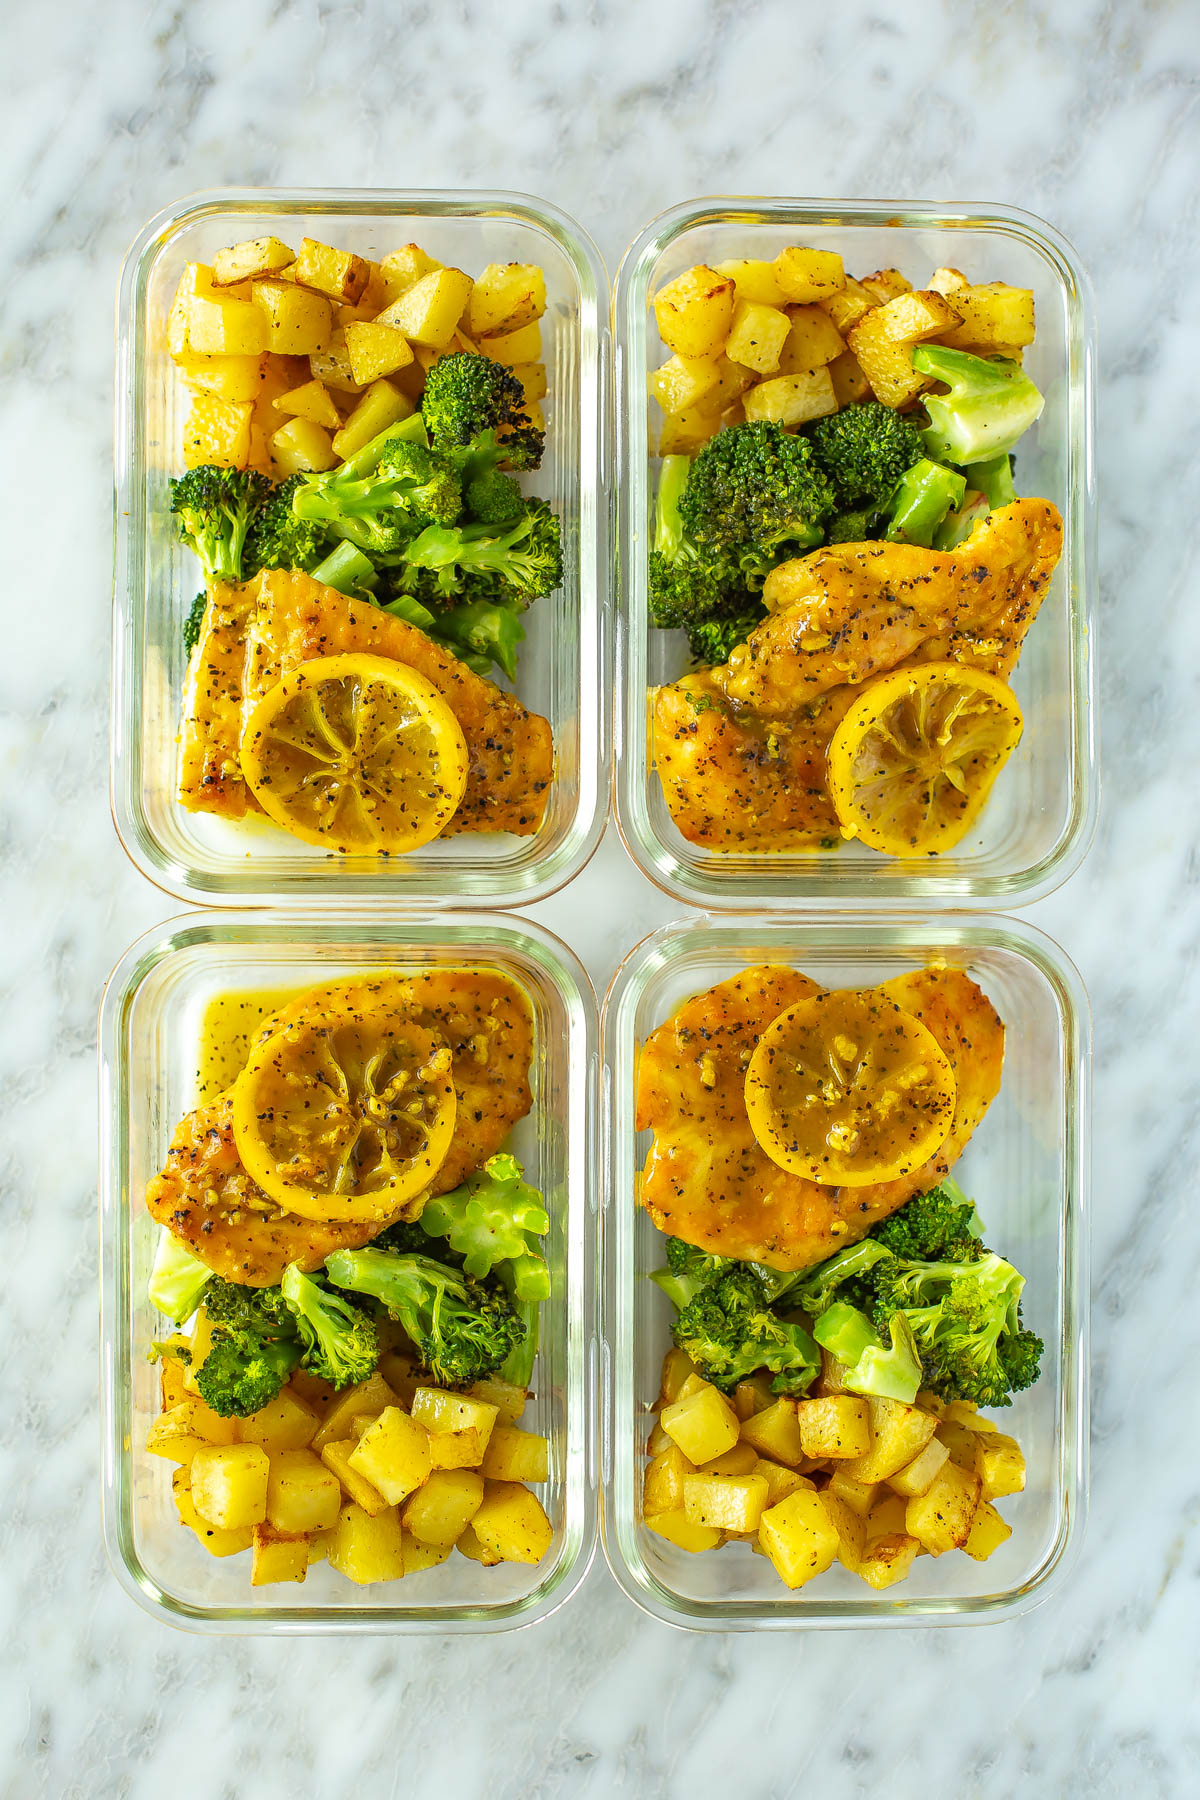 Four meal prep containers, each with lemon pepper chicken, roasted potatoes and roasted broccoli.